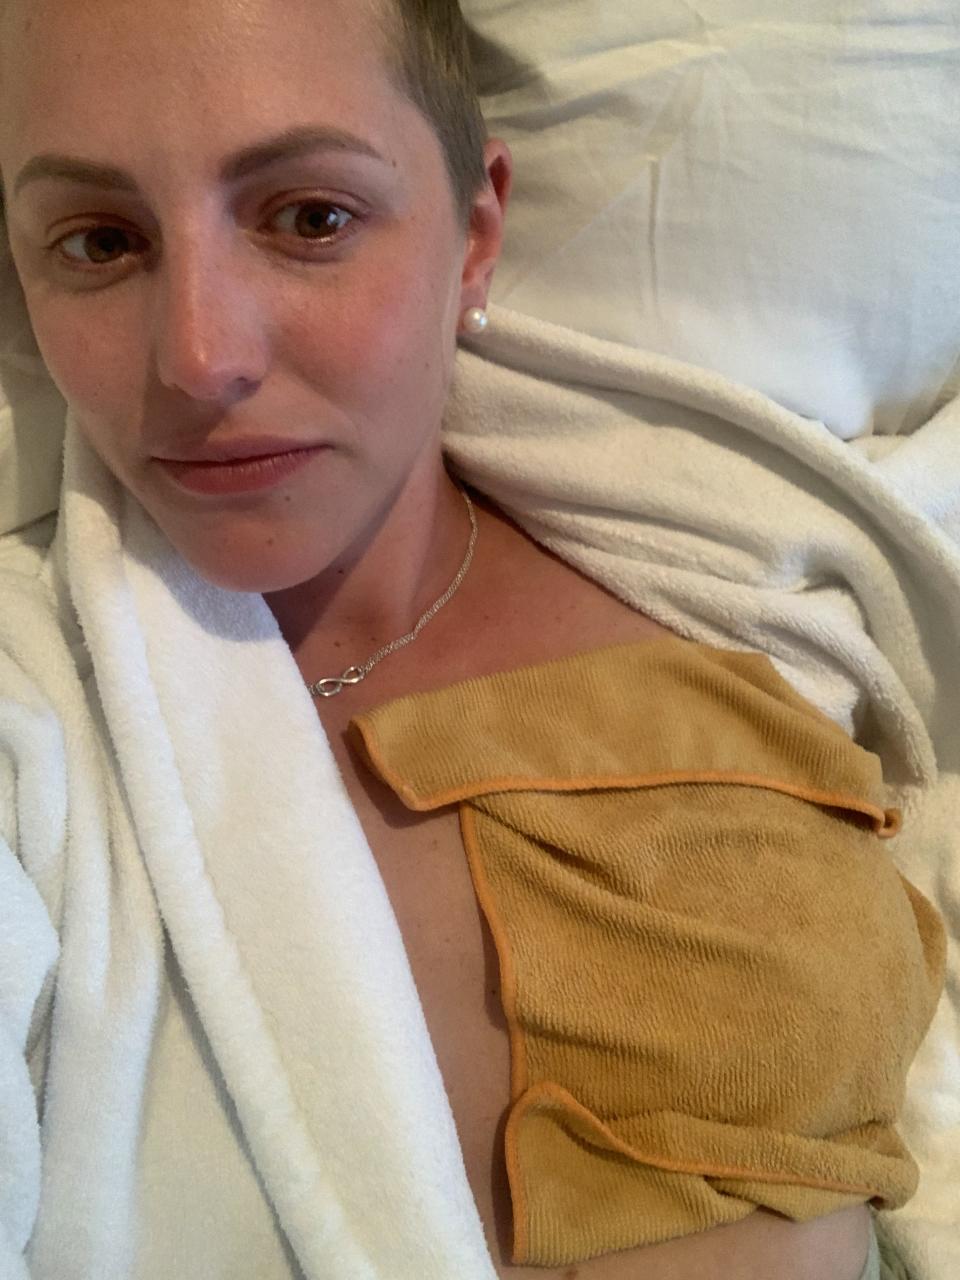 Robyn Goldman, who advocated for her own health while showing symptoms and was diagnosed with breast cancer, lies in a bed. (Photo provided by Robyn Goldman) 